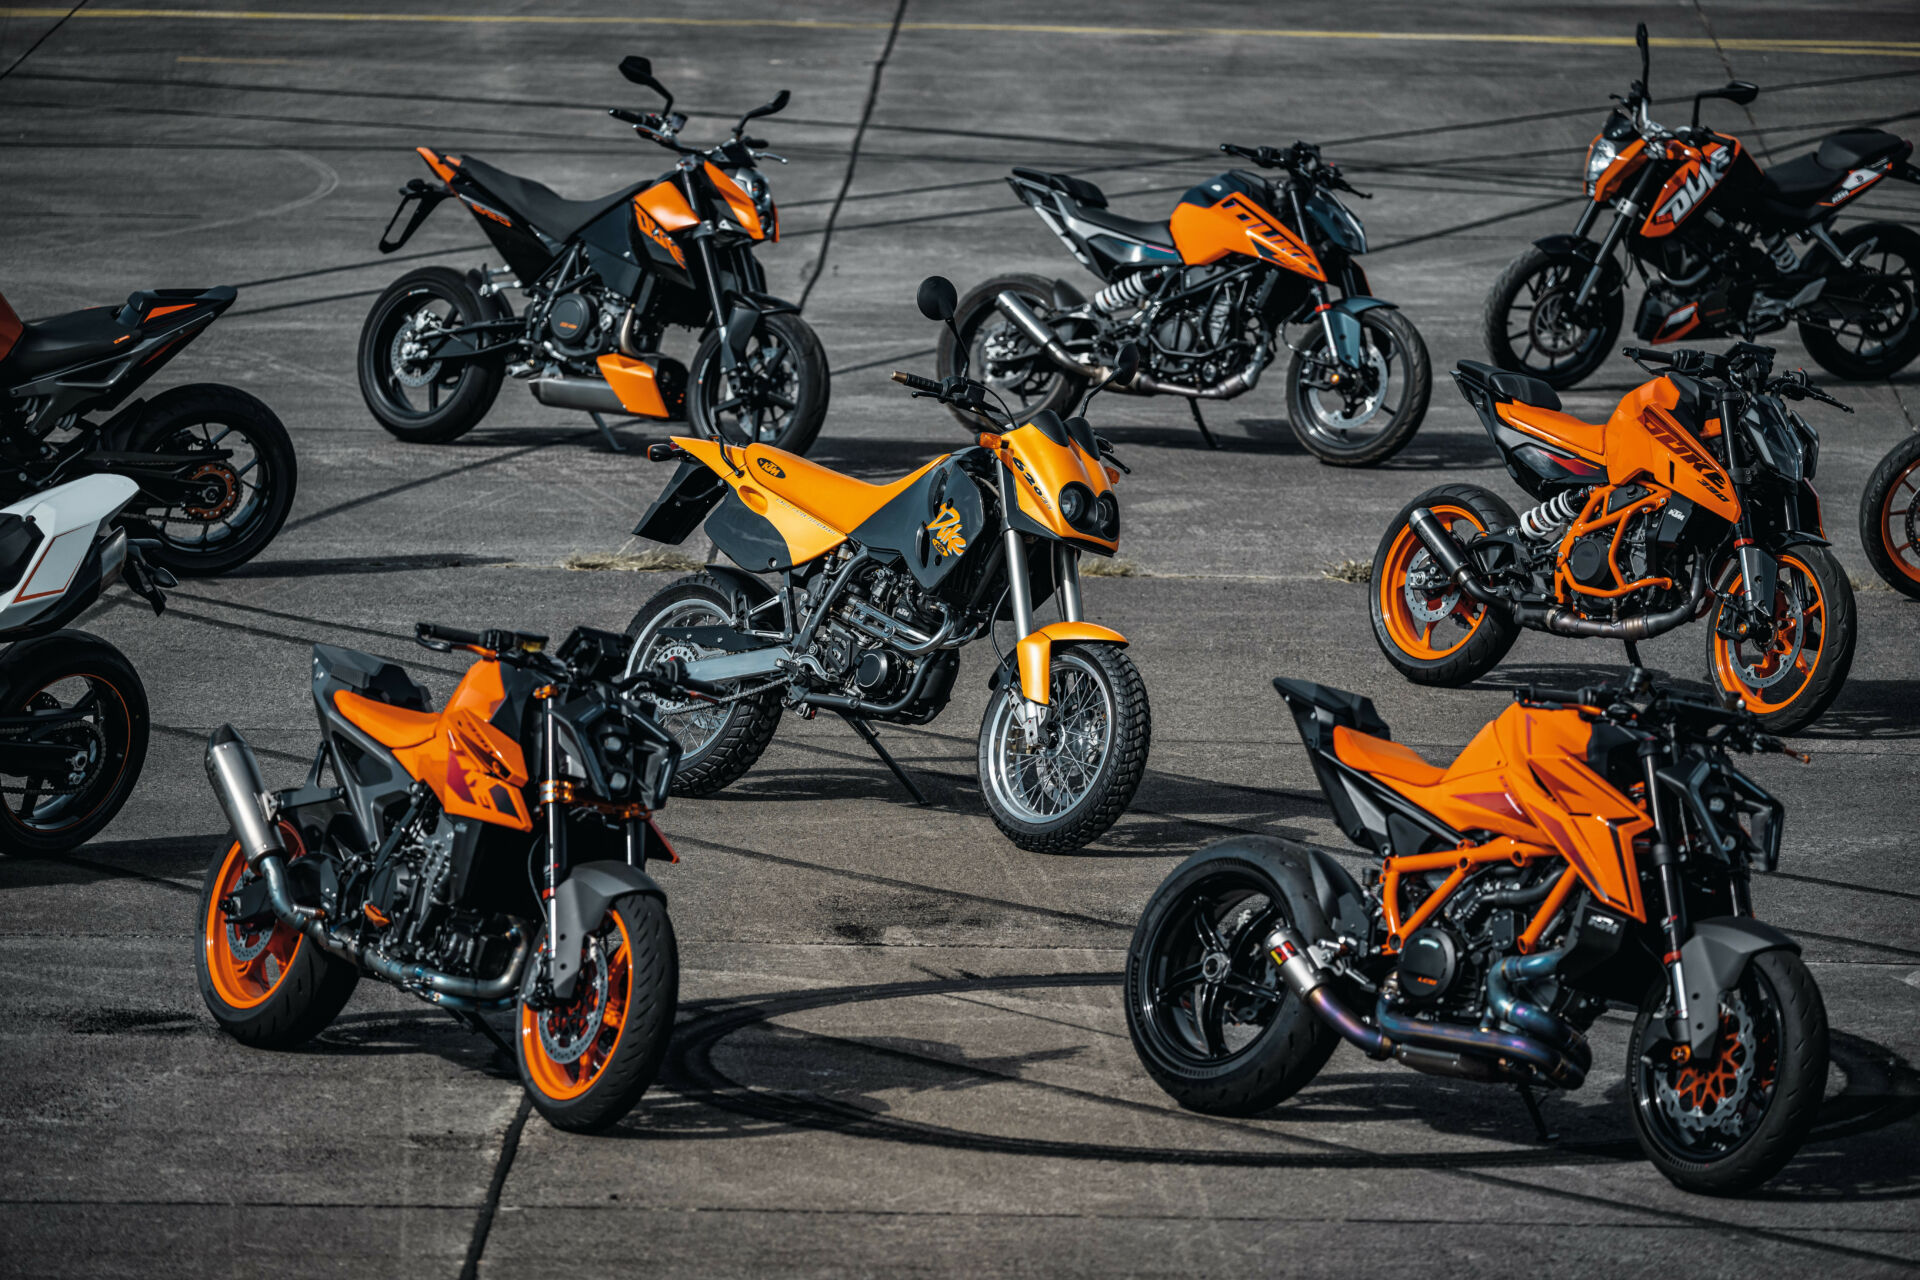 The original 1994 KTM Duke (center) with other KTM Duke models from throughout the years, including a 2024 KTM 990 Duke (bottom left) and a 2024 KTM 1390 Super Duke R EVO (bottom right). Photo by Rudi Schedl, courtesy KTM.